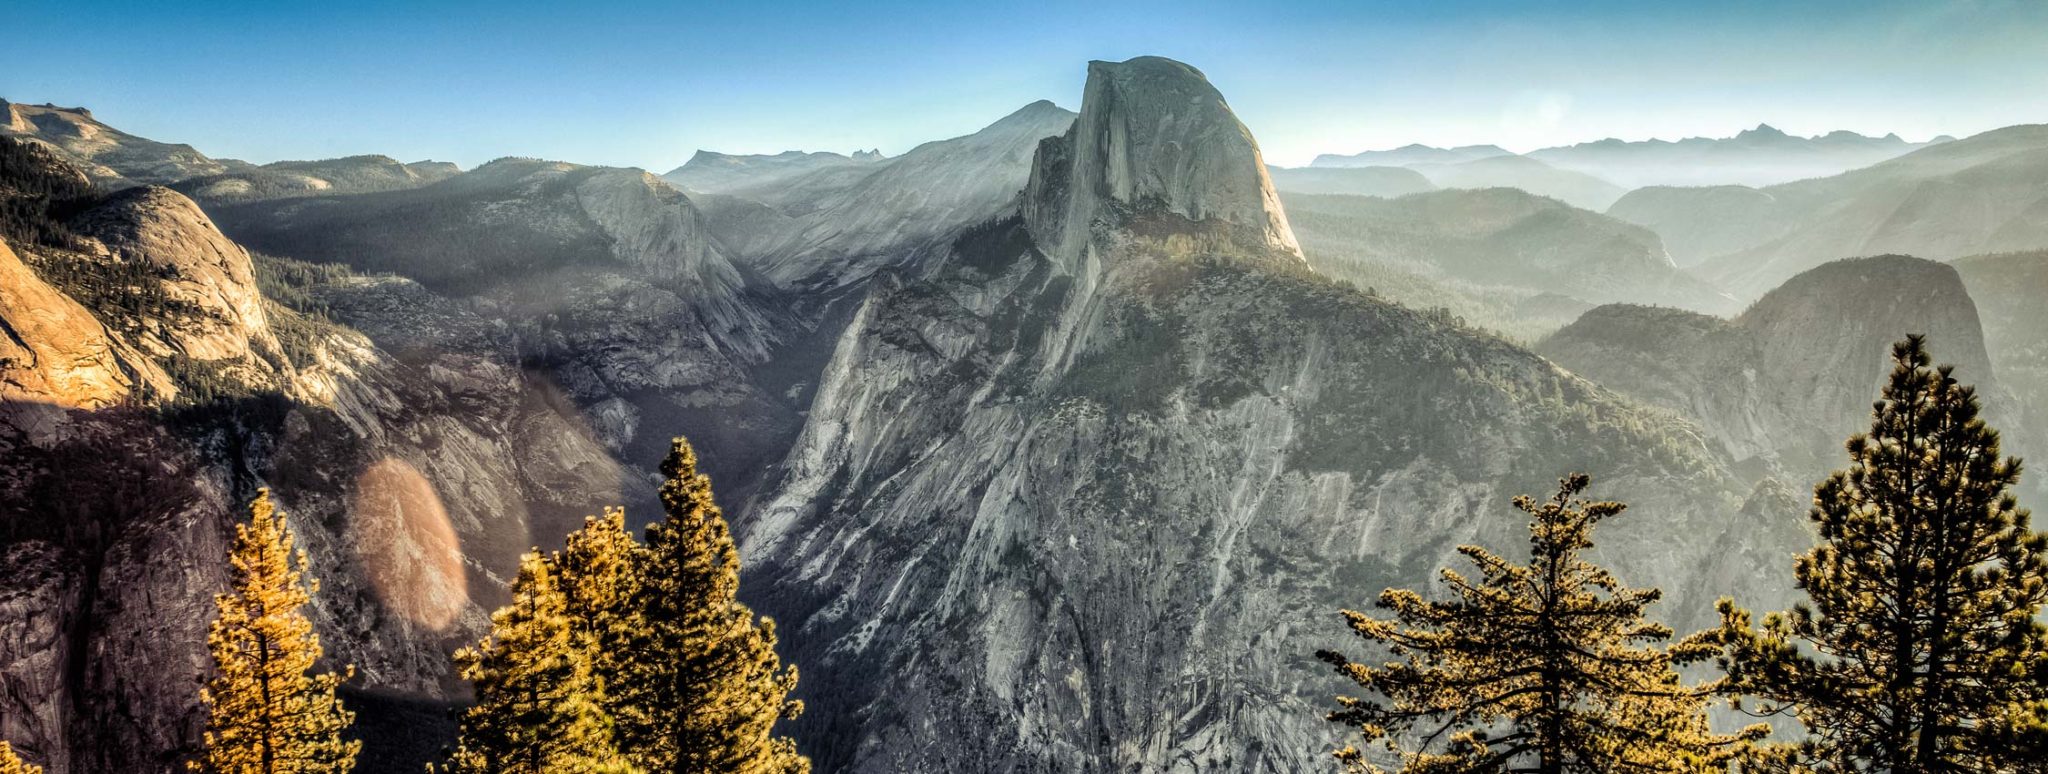 5 National Parks to Explore in 2016